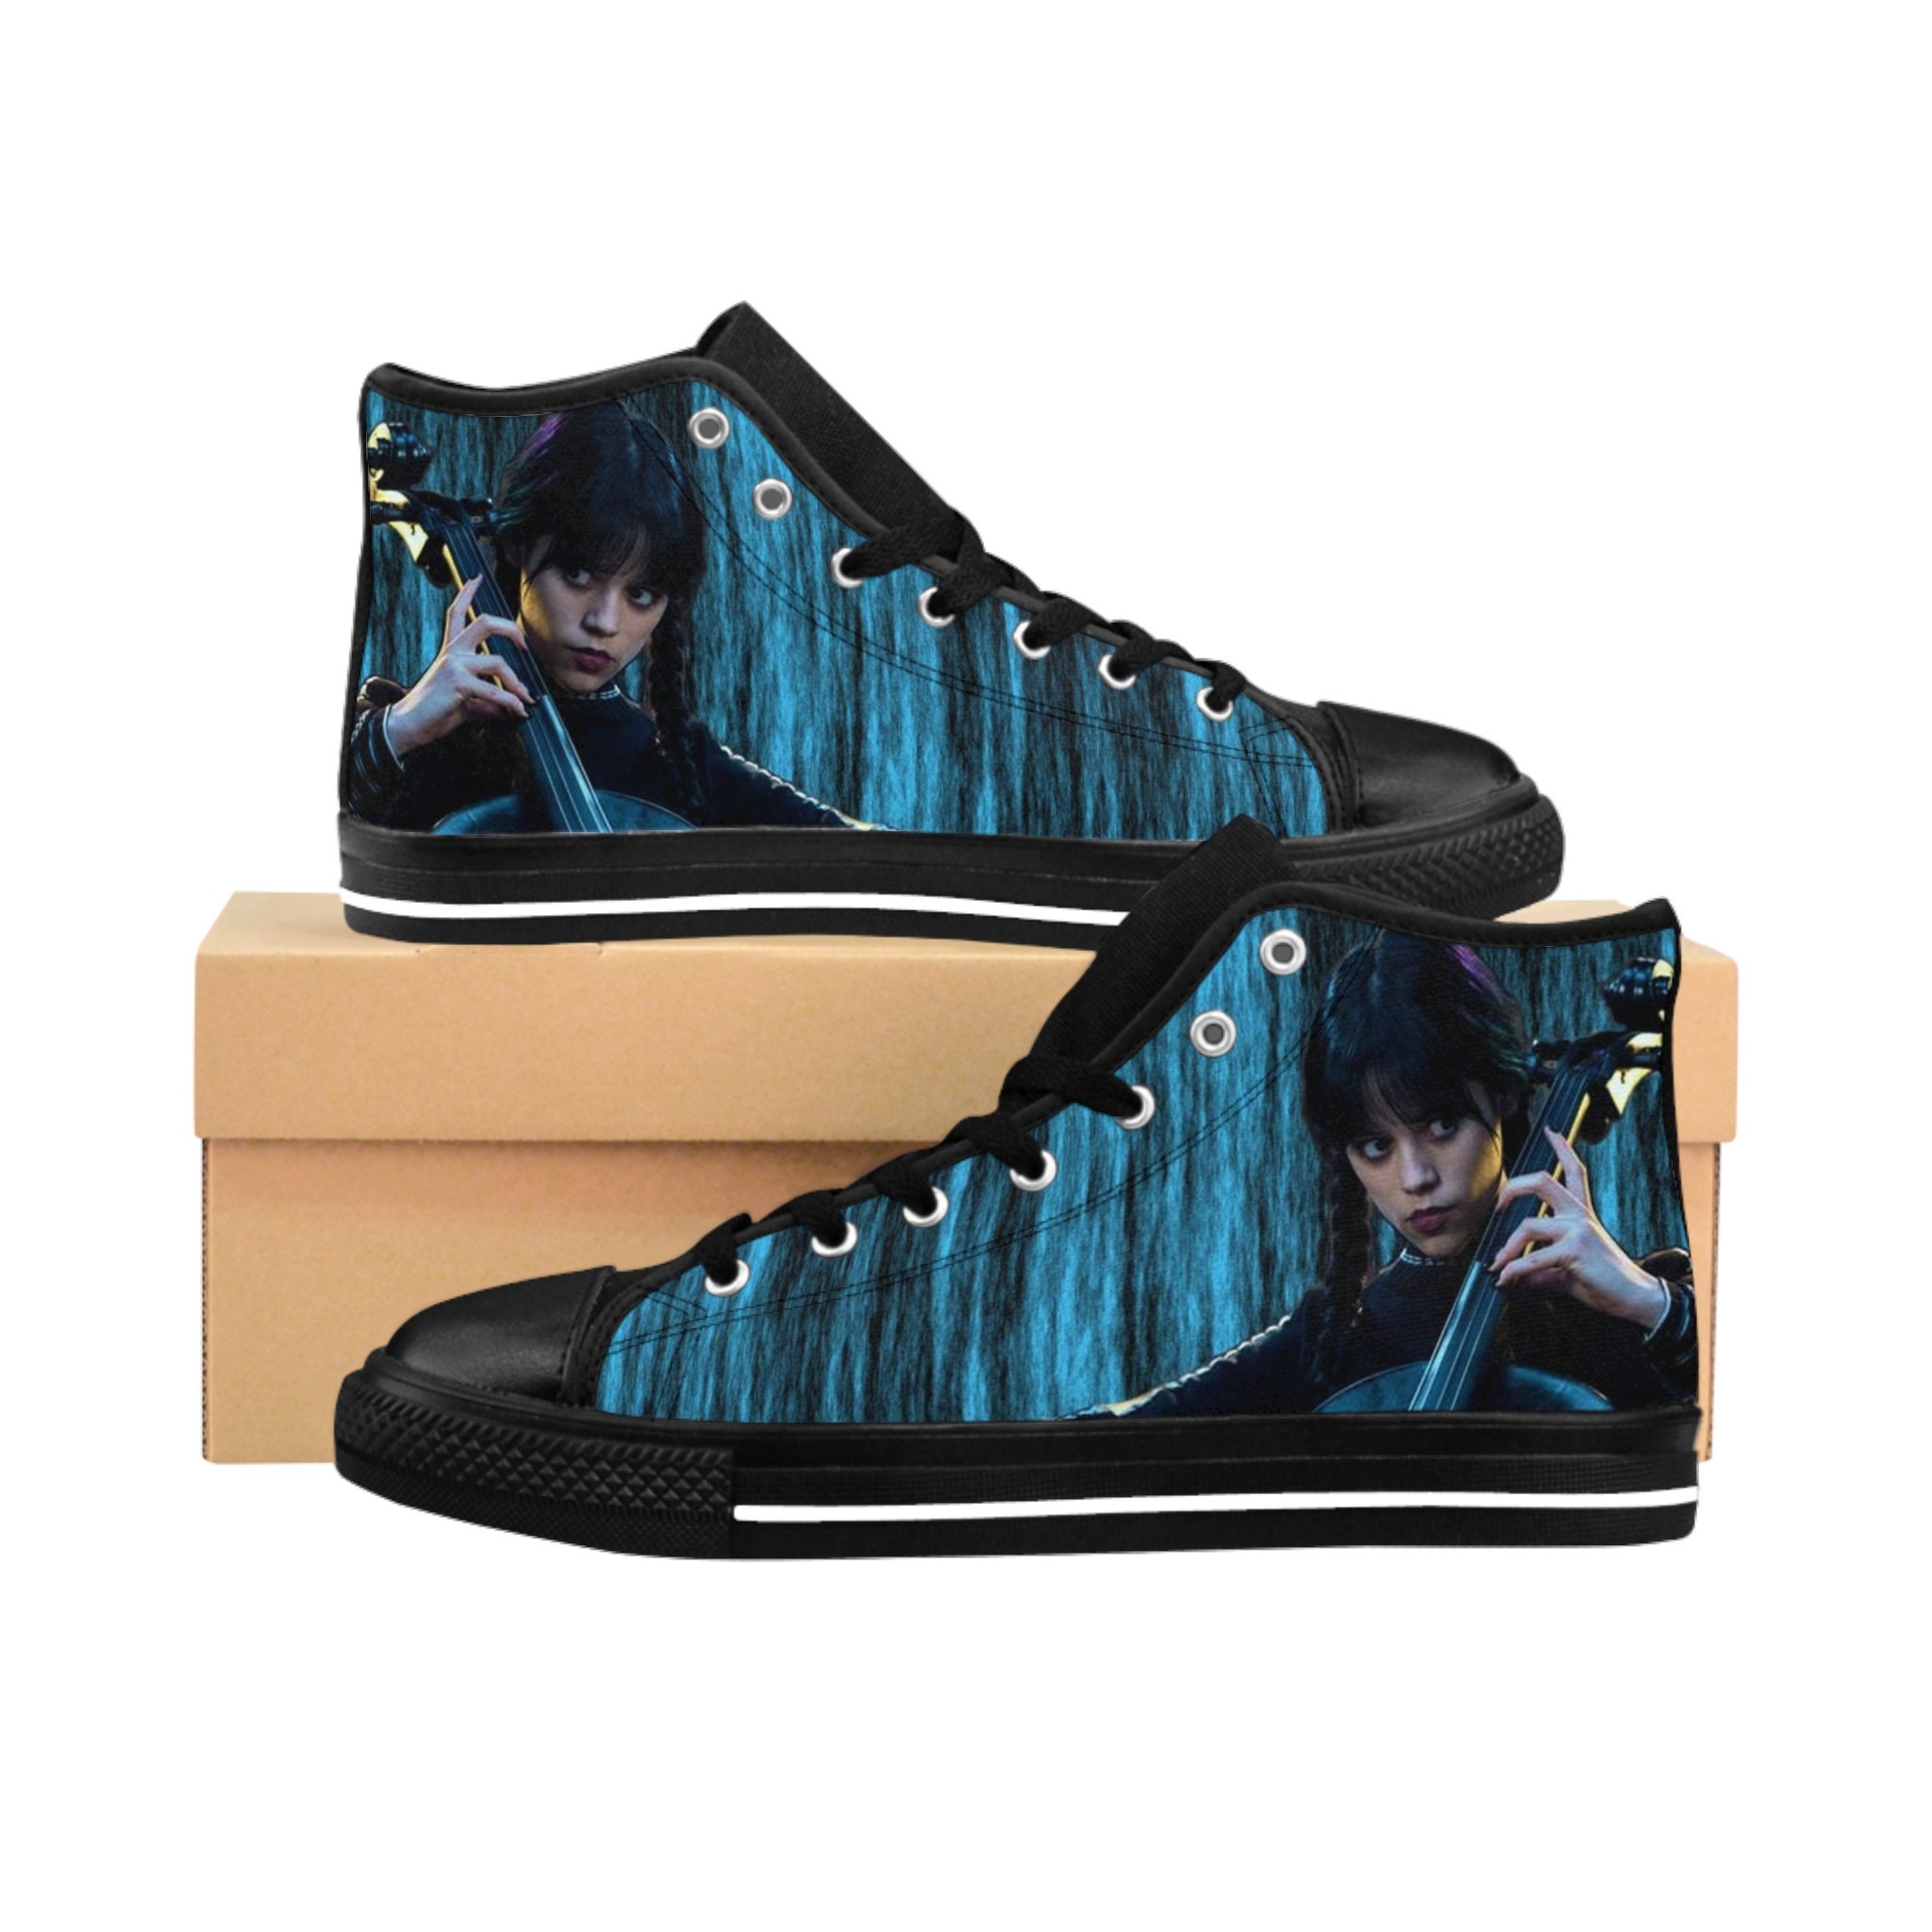 Wednesday Addams Playing The Cello High Top's Women's Classic Sneakers